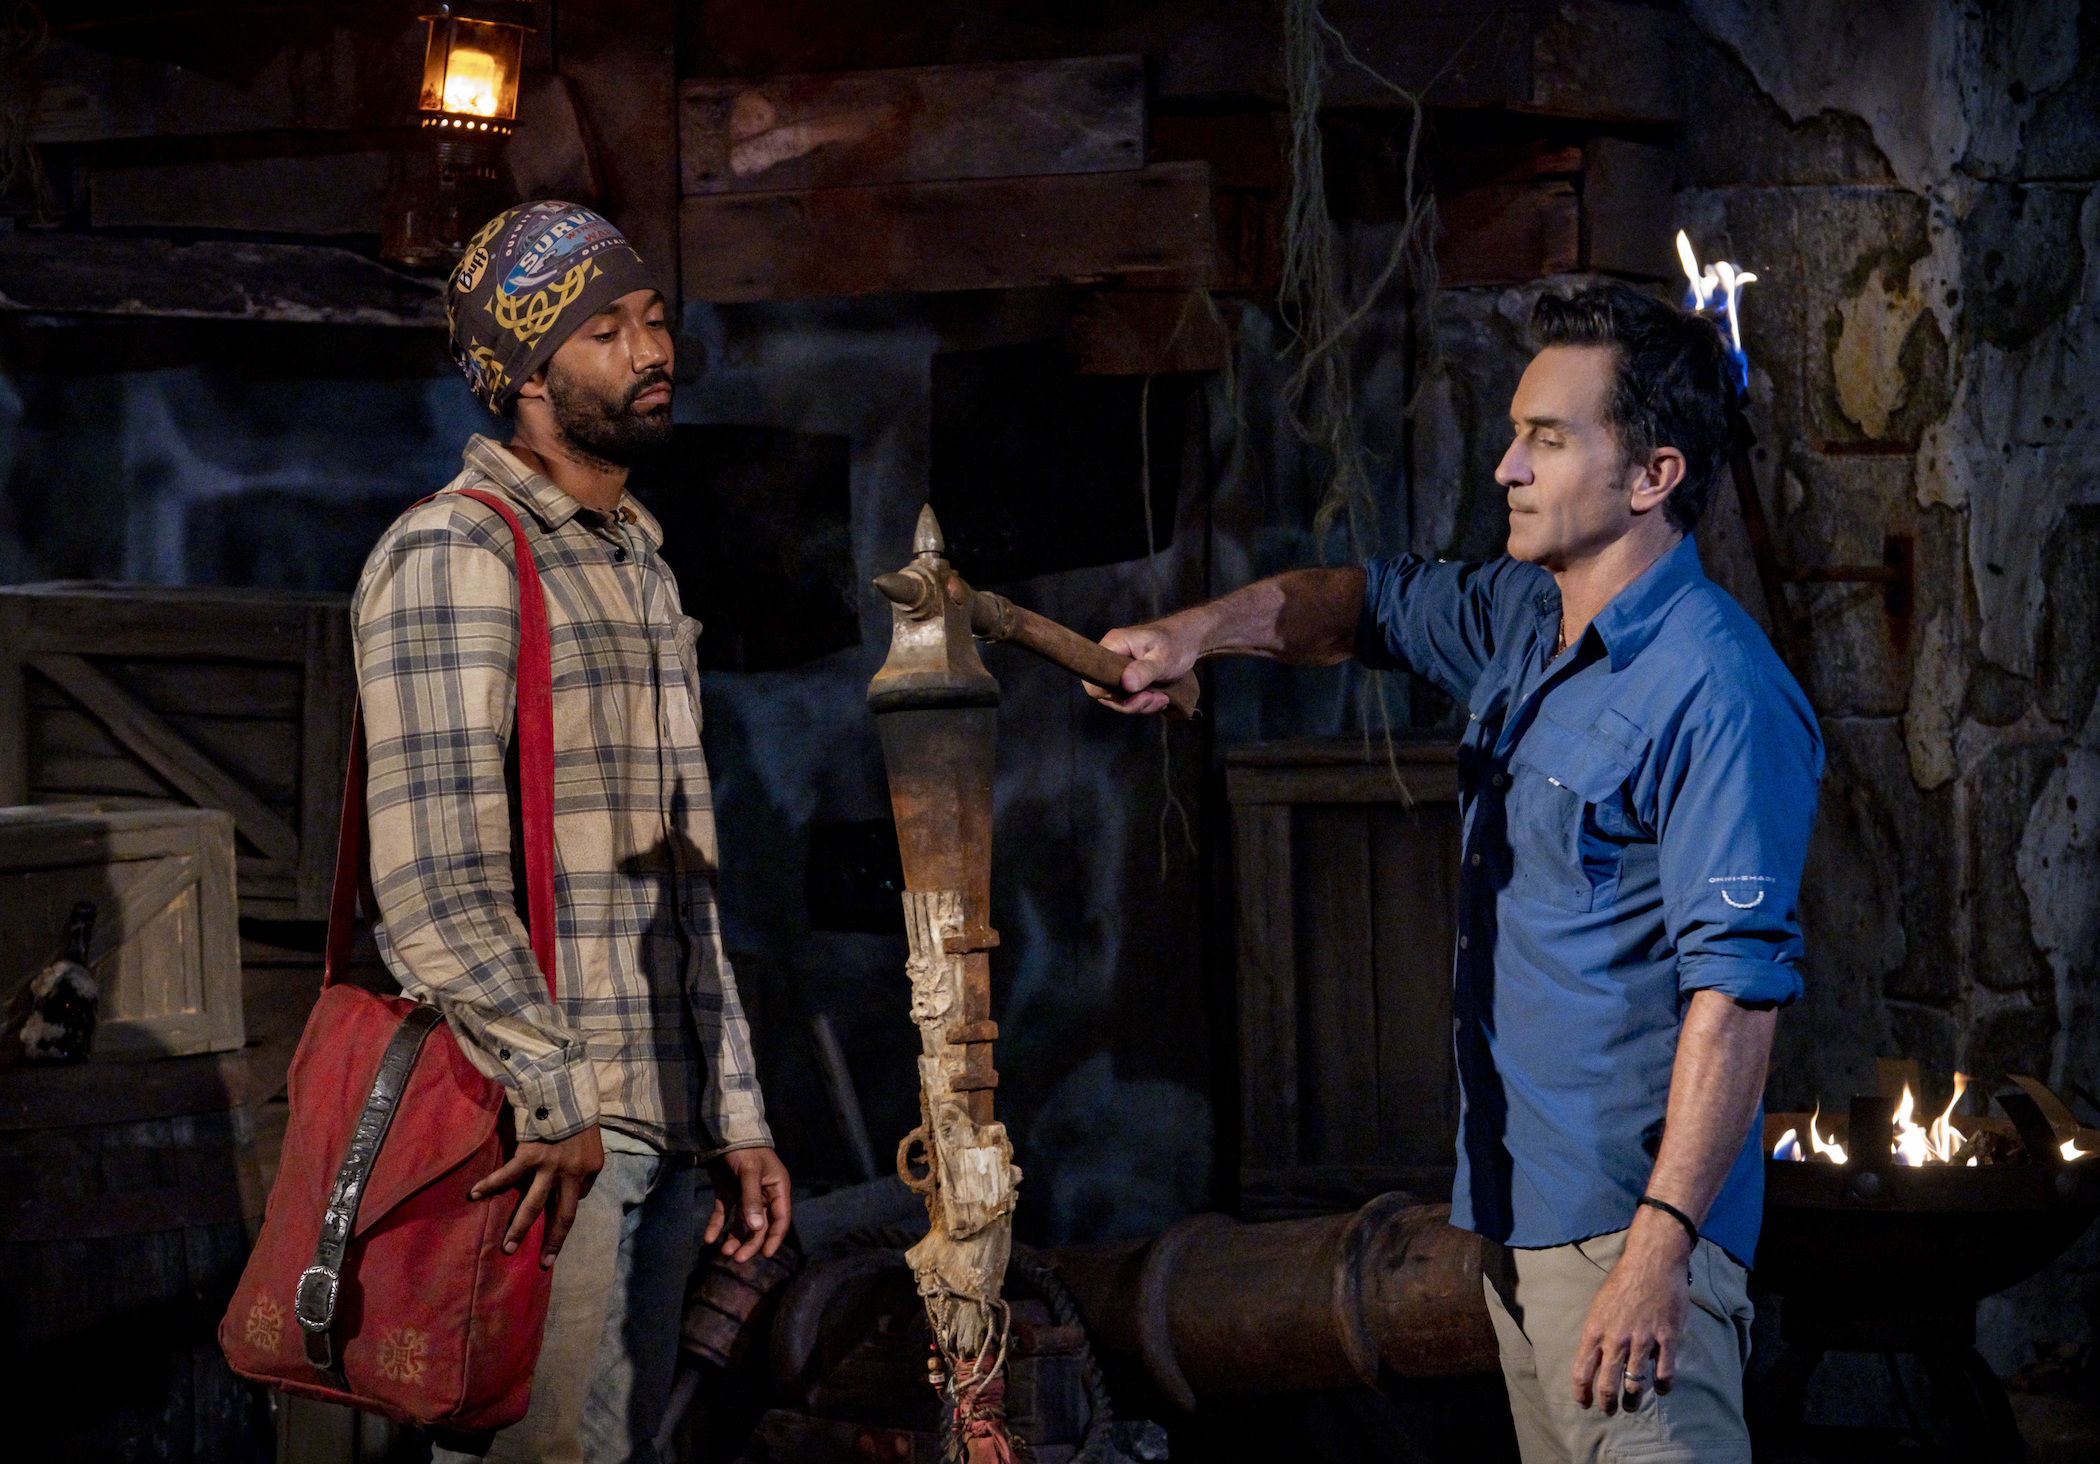 Wendell Holland, a possible contestant on MTV's 'The Challenge,' getting his torch extinguished by Jeff Probst on 'Survivor'